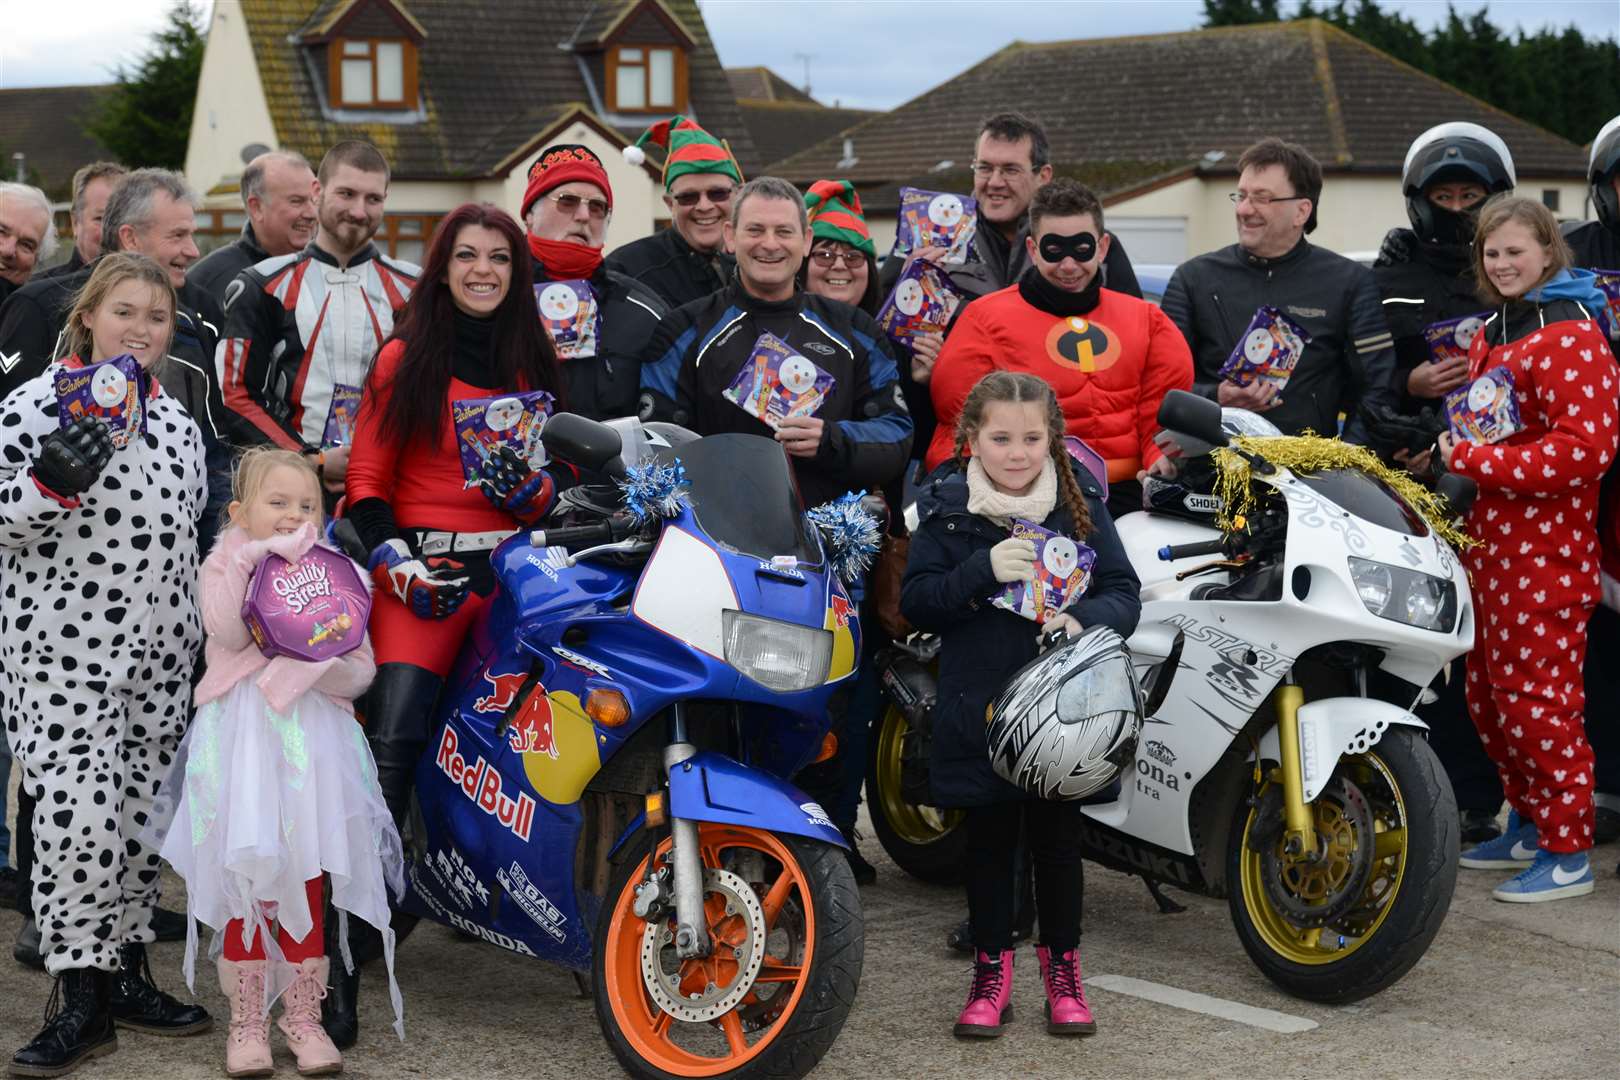 Bikers setting off to deliver selection boxes to care homes across the Island.